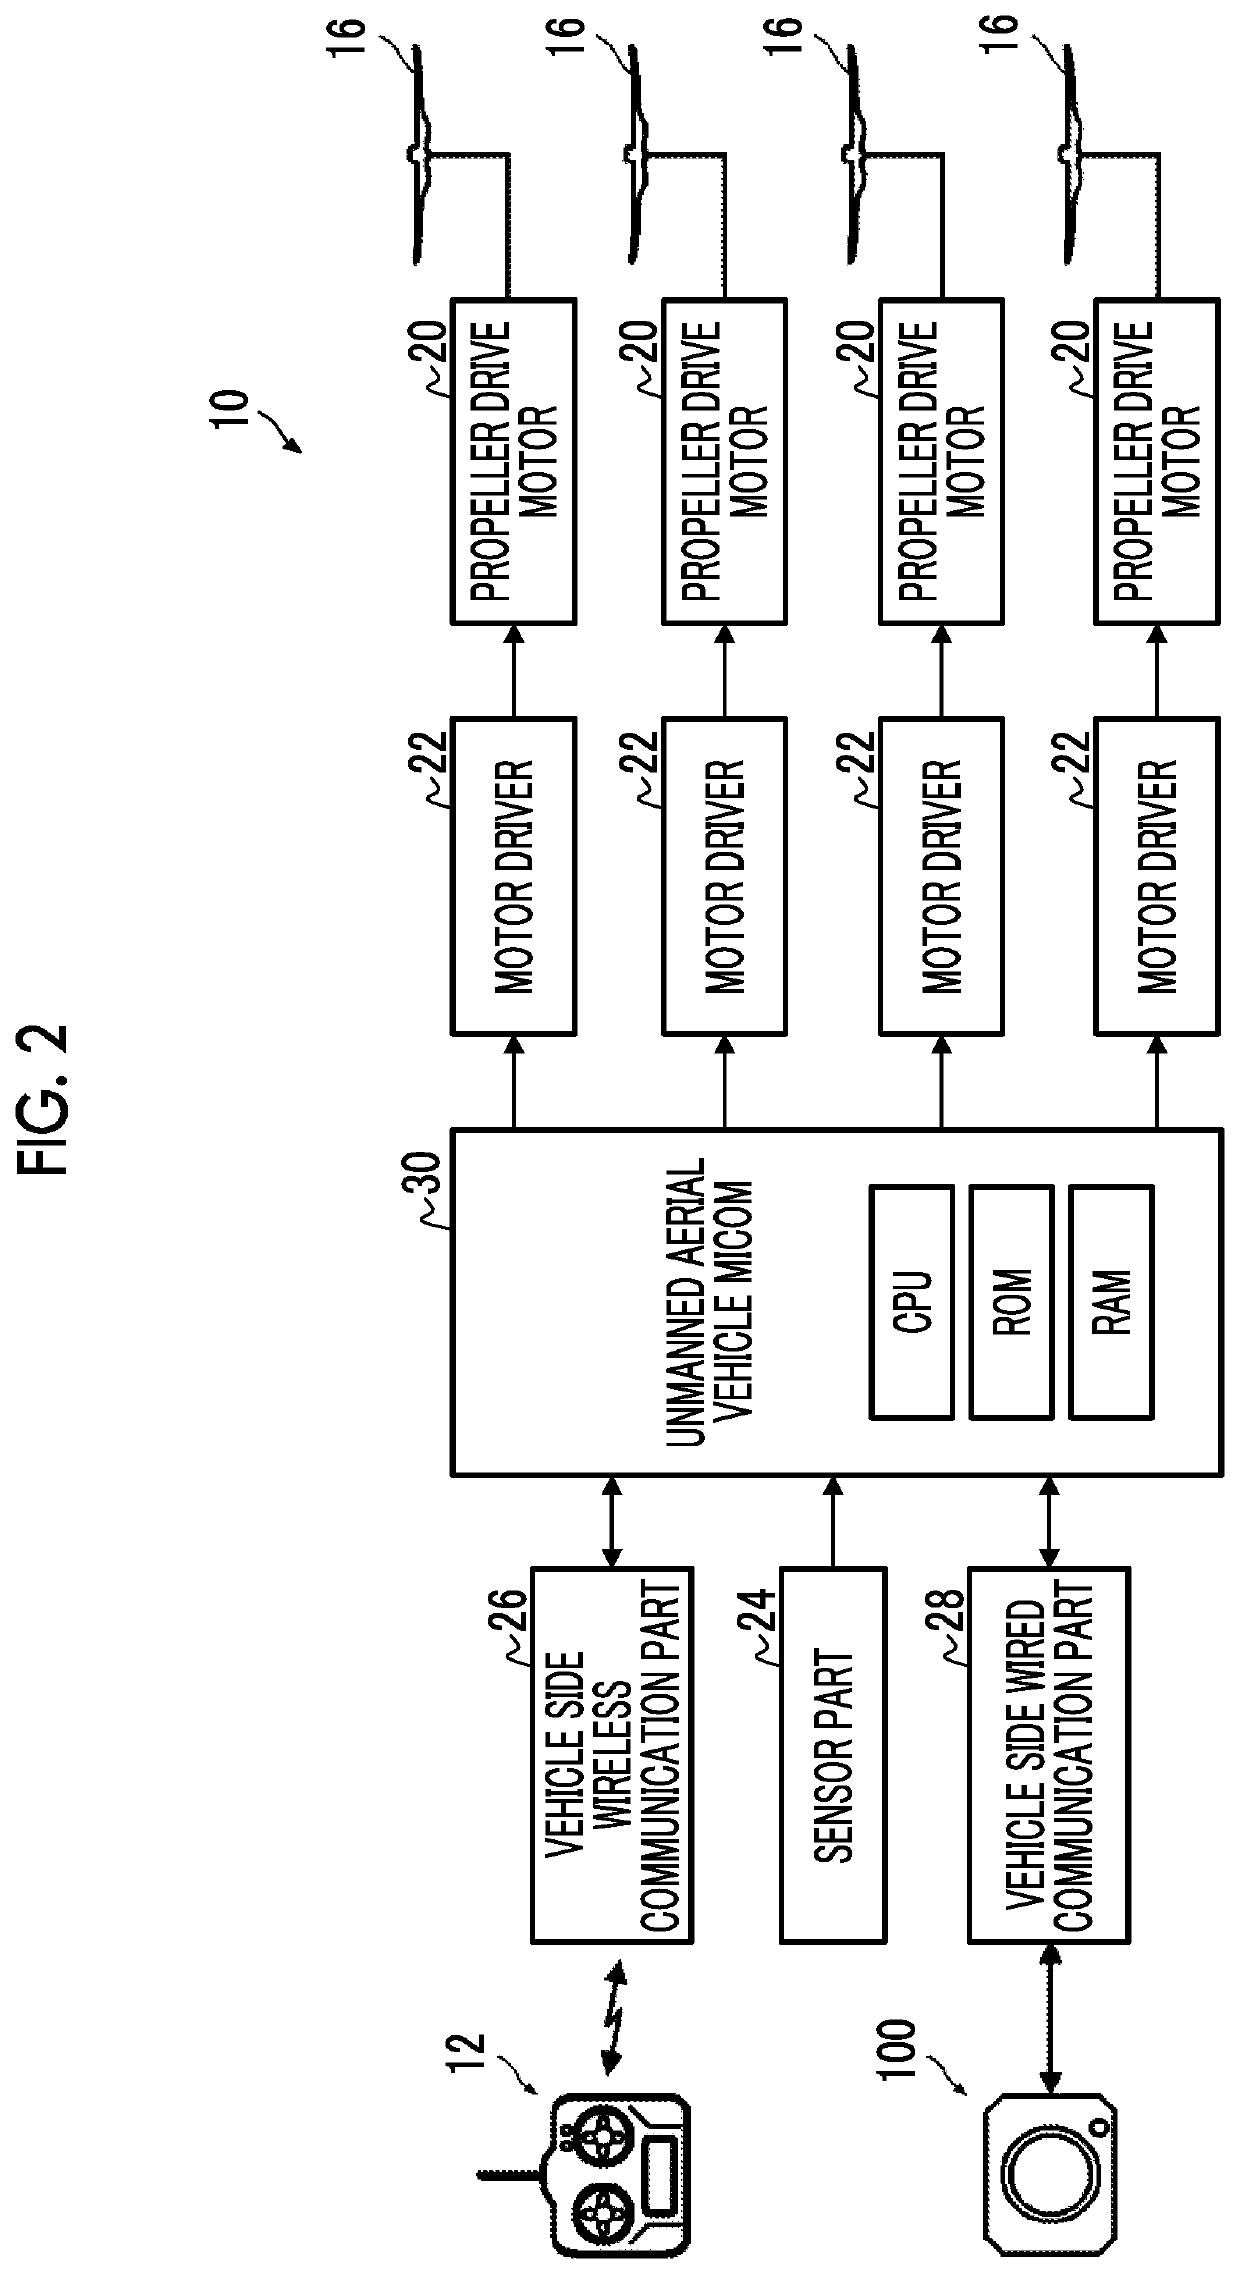 Imaging apparatus and image composition apparatus